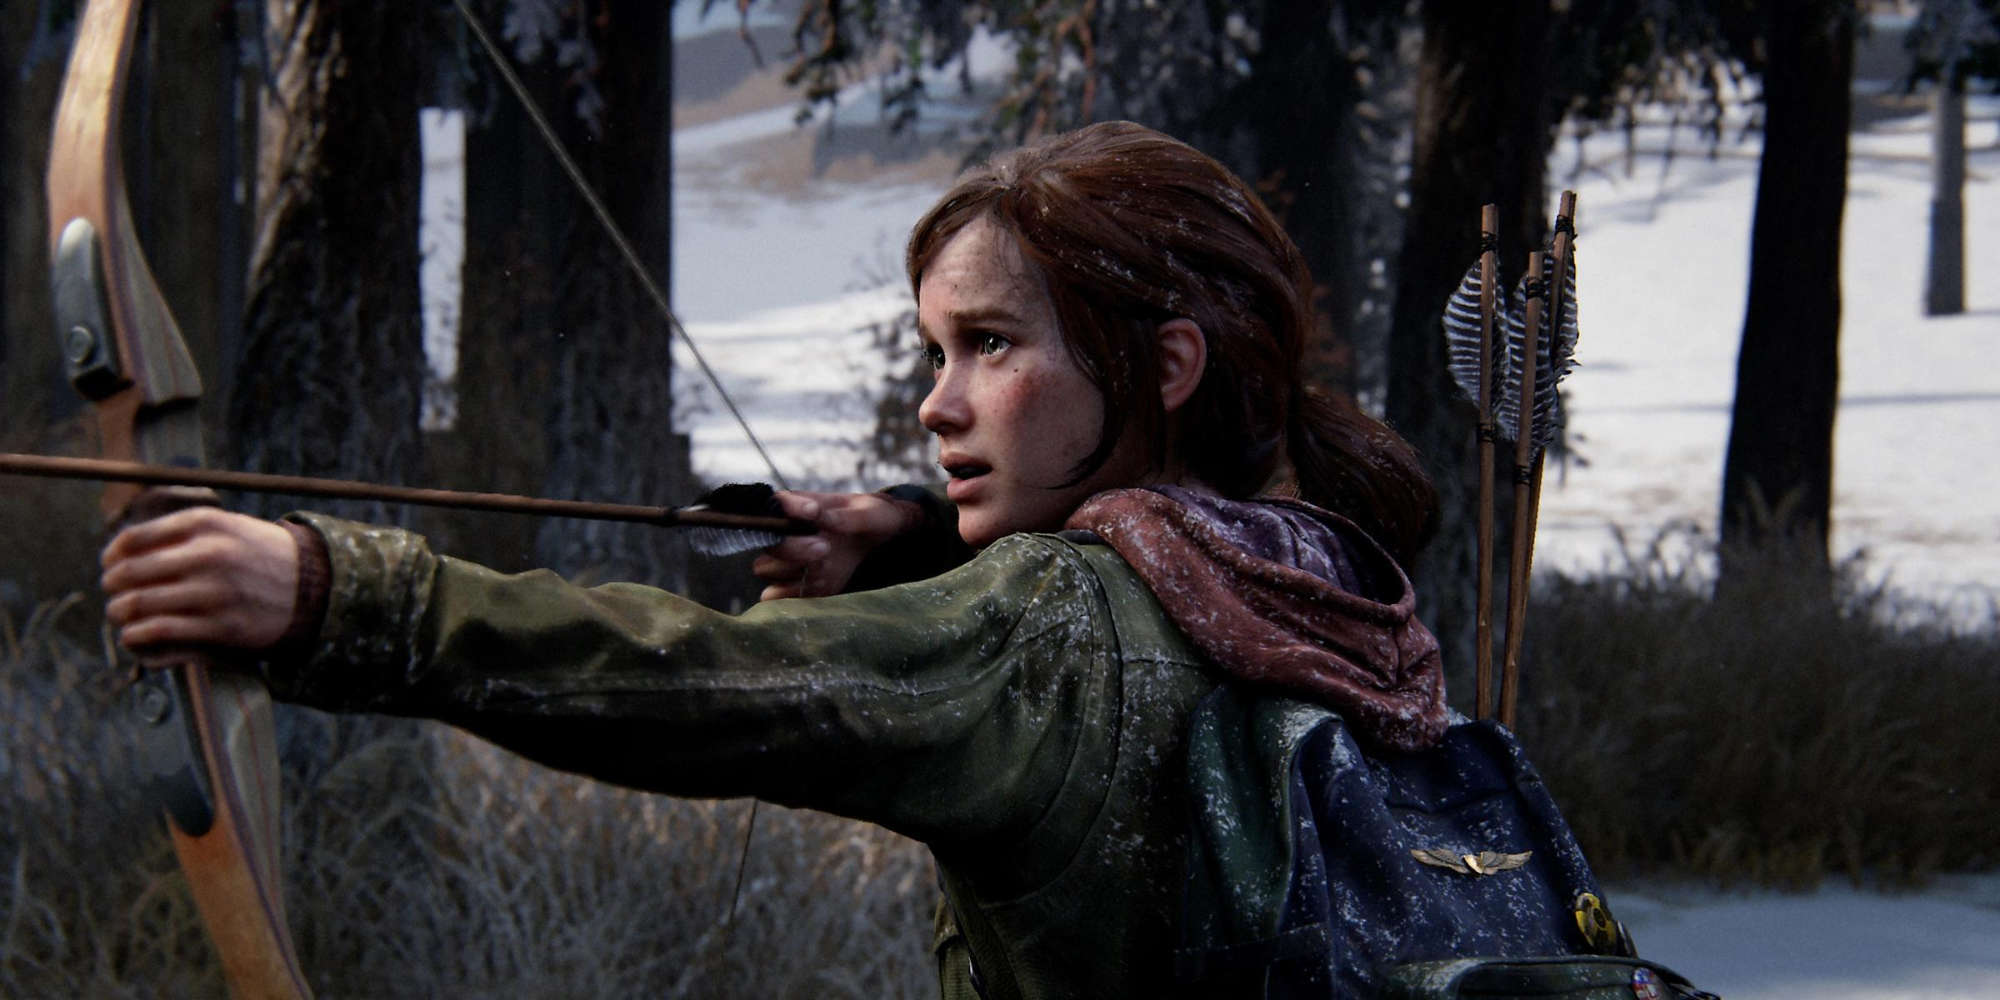 Ellie aims a bow from The Last of Us 